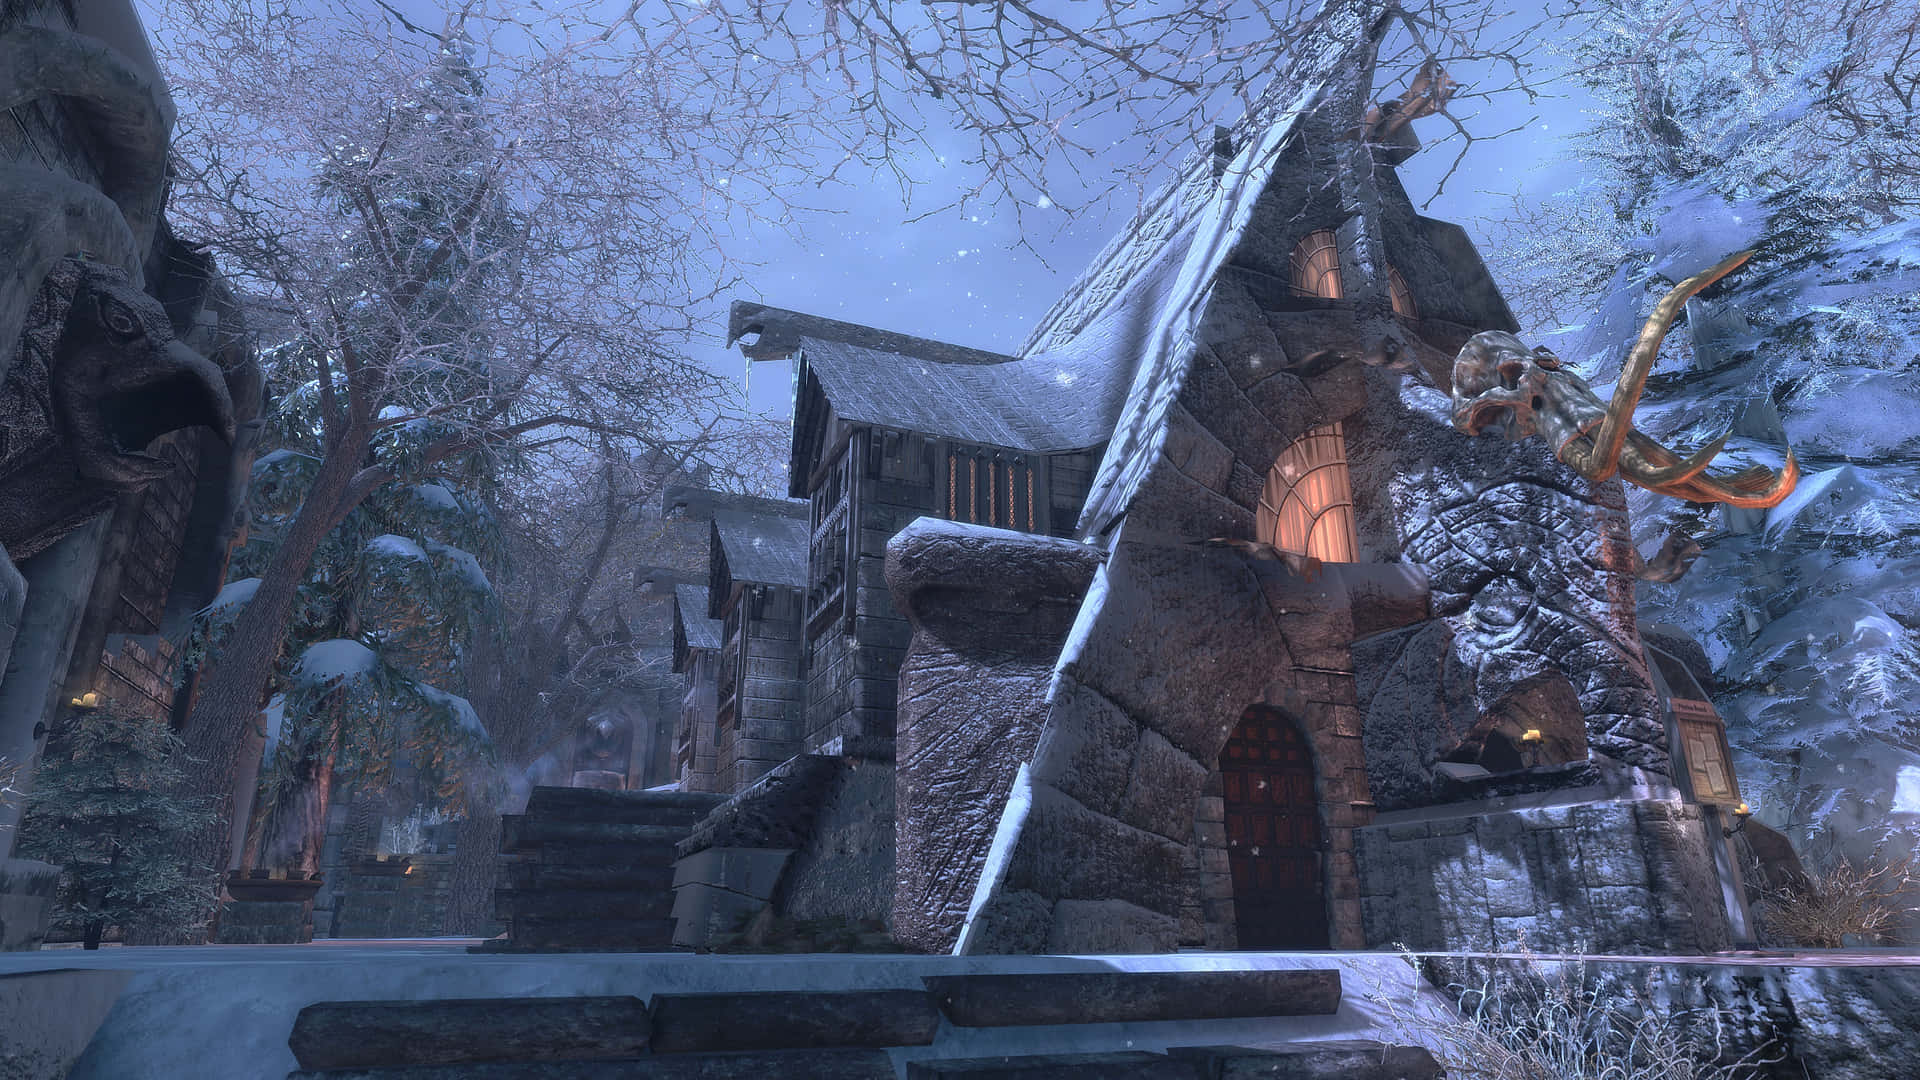 Snowfall in Windhelm - The Ancient City in Skyrim Wallpaper